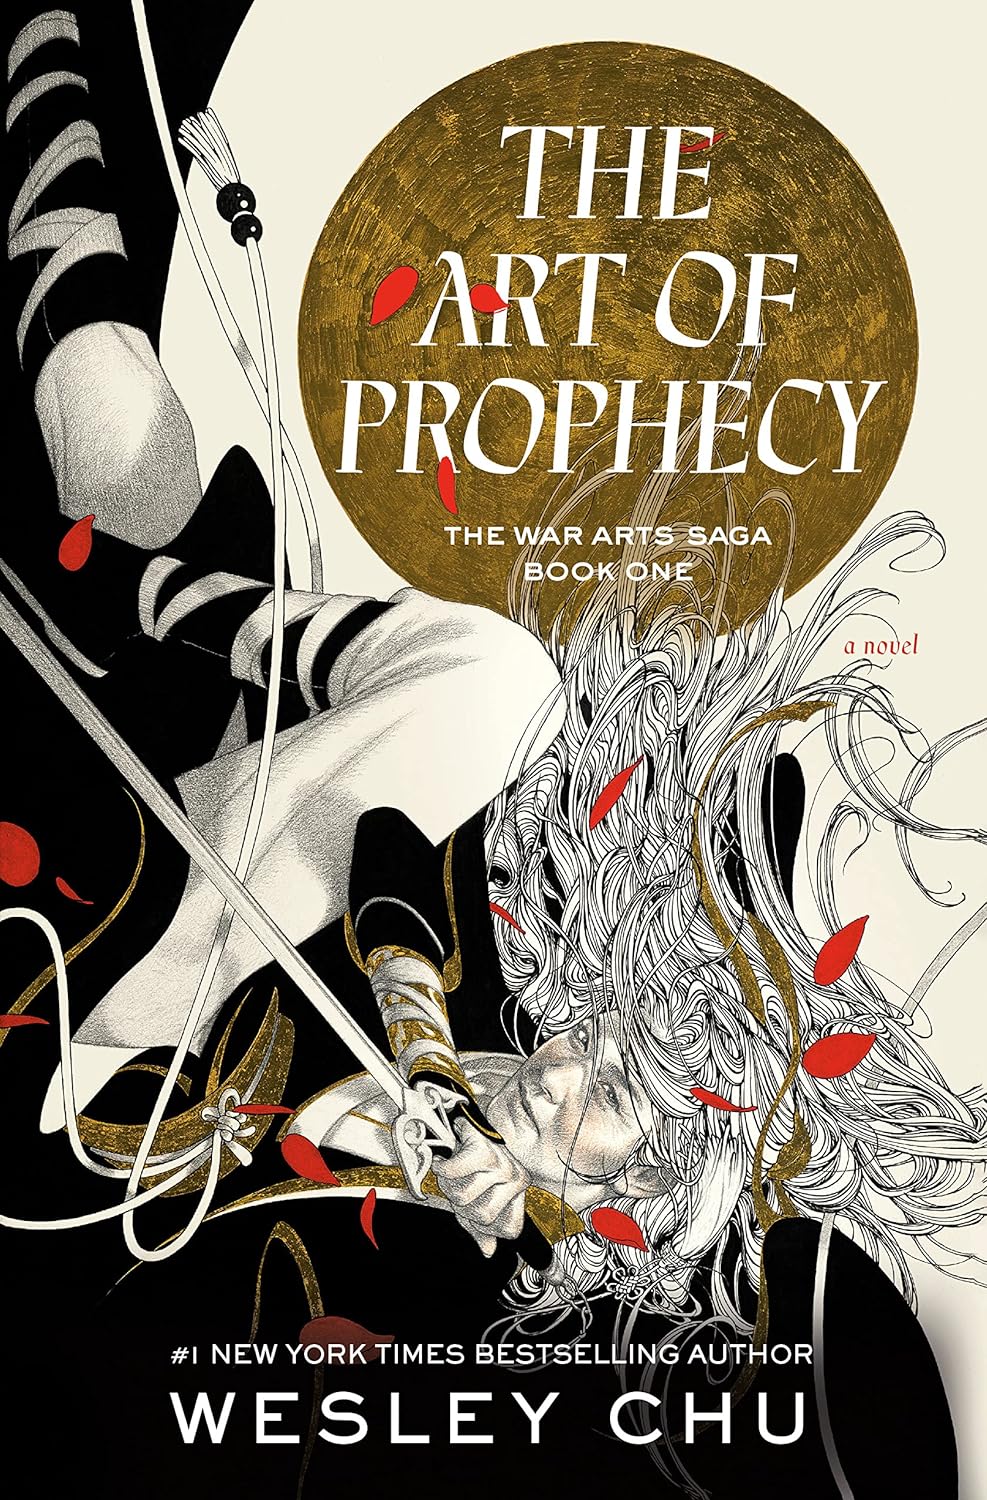 The Art of Prophecy (The War Arts Saga Book One) by Wesley Chu